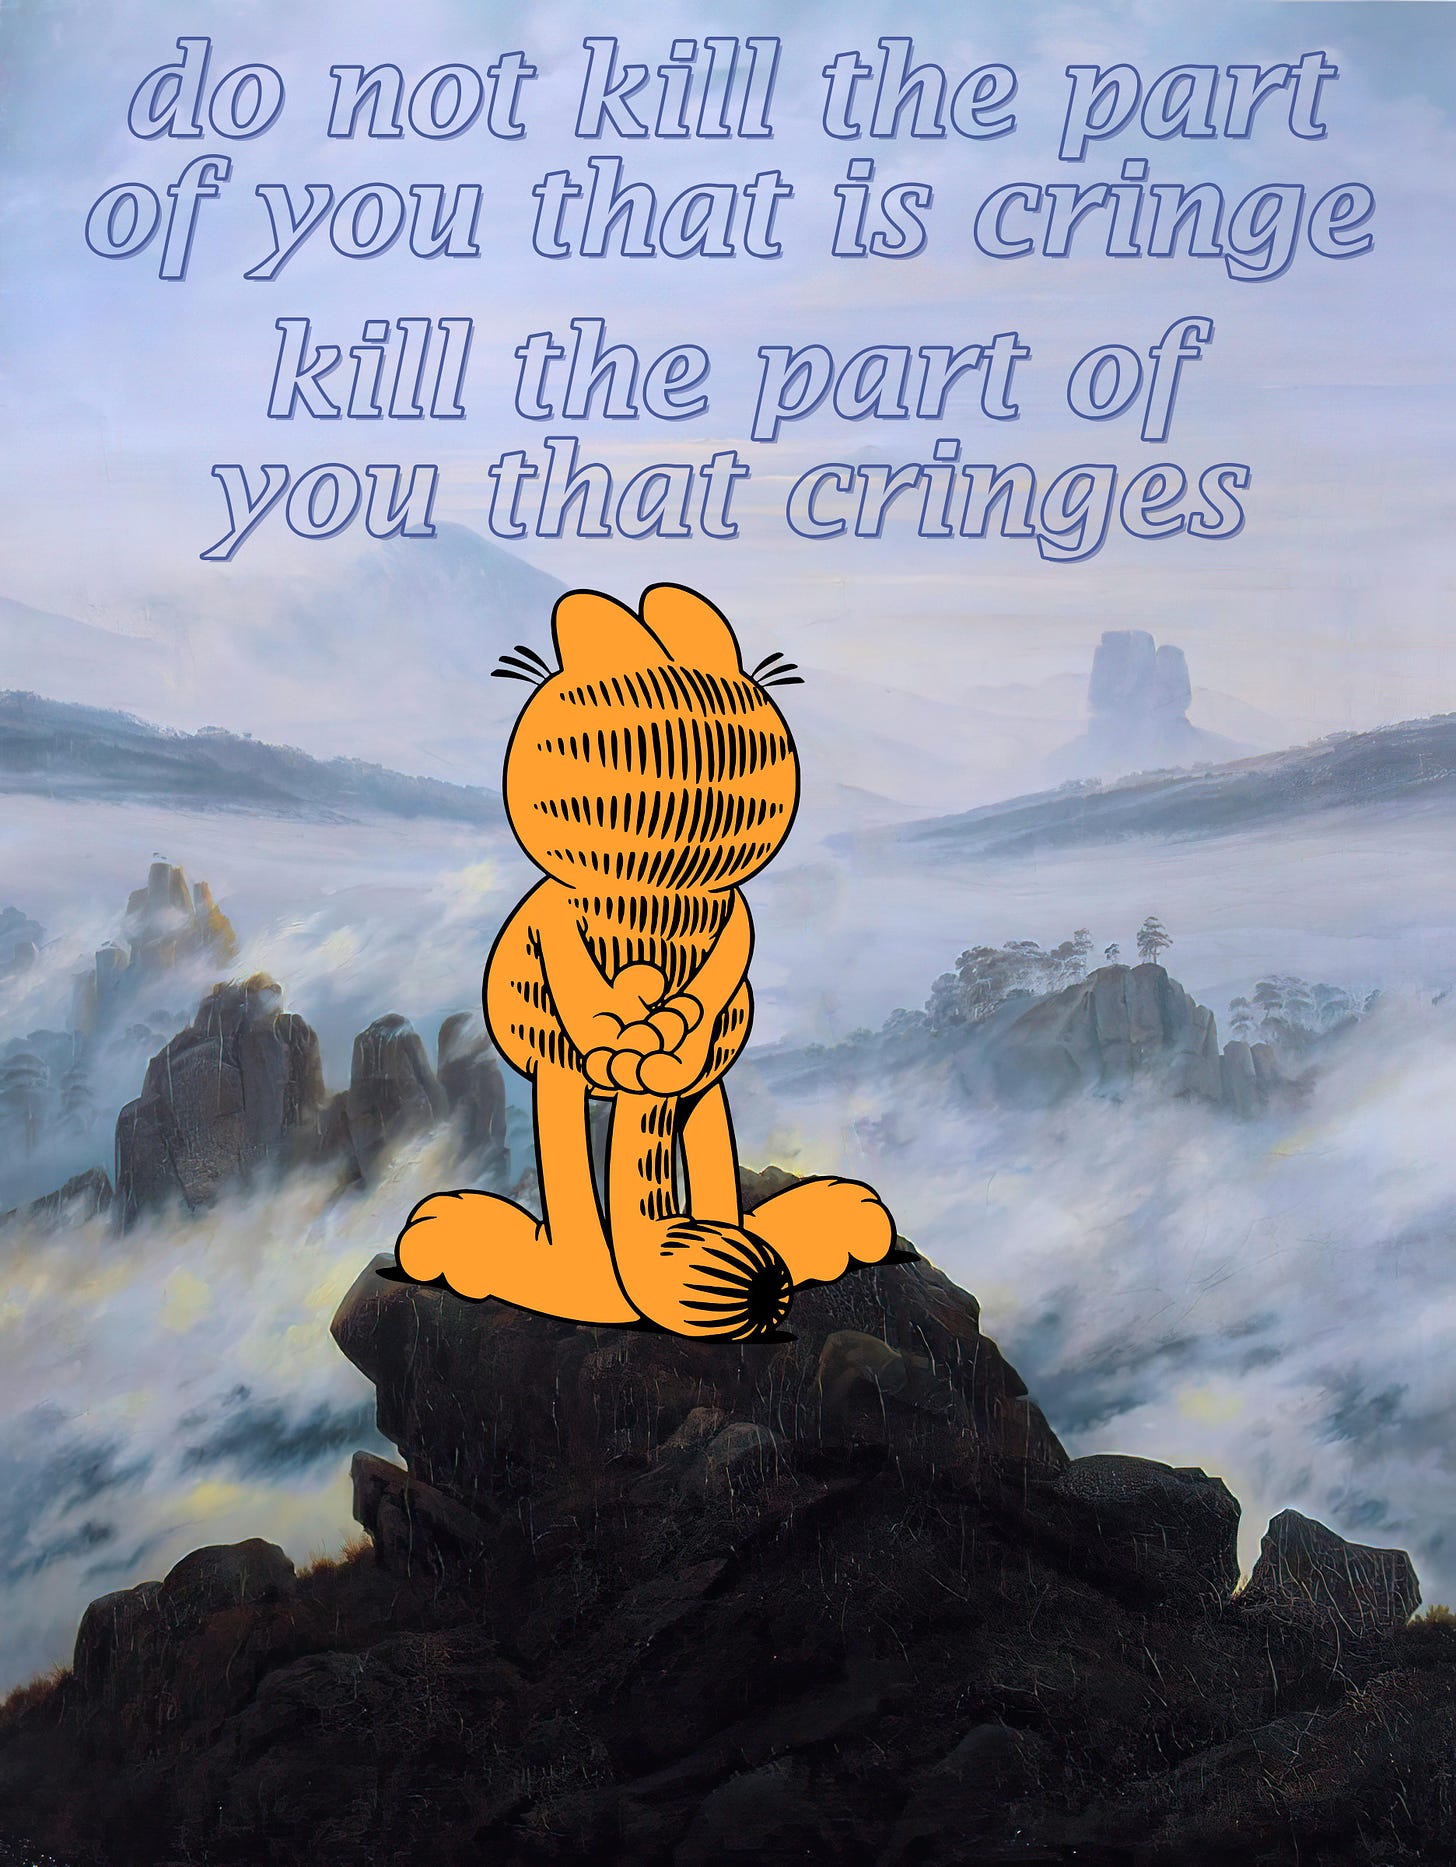 Garfield the cat standing on a rocky hilltop and looking out upon similar misty peaks with his hands behind his back below a caption that reads "do not kill the part of you that is cringe, kill the part of you that cringes."